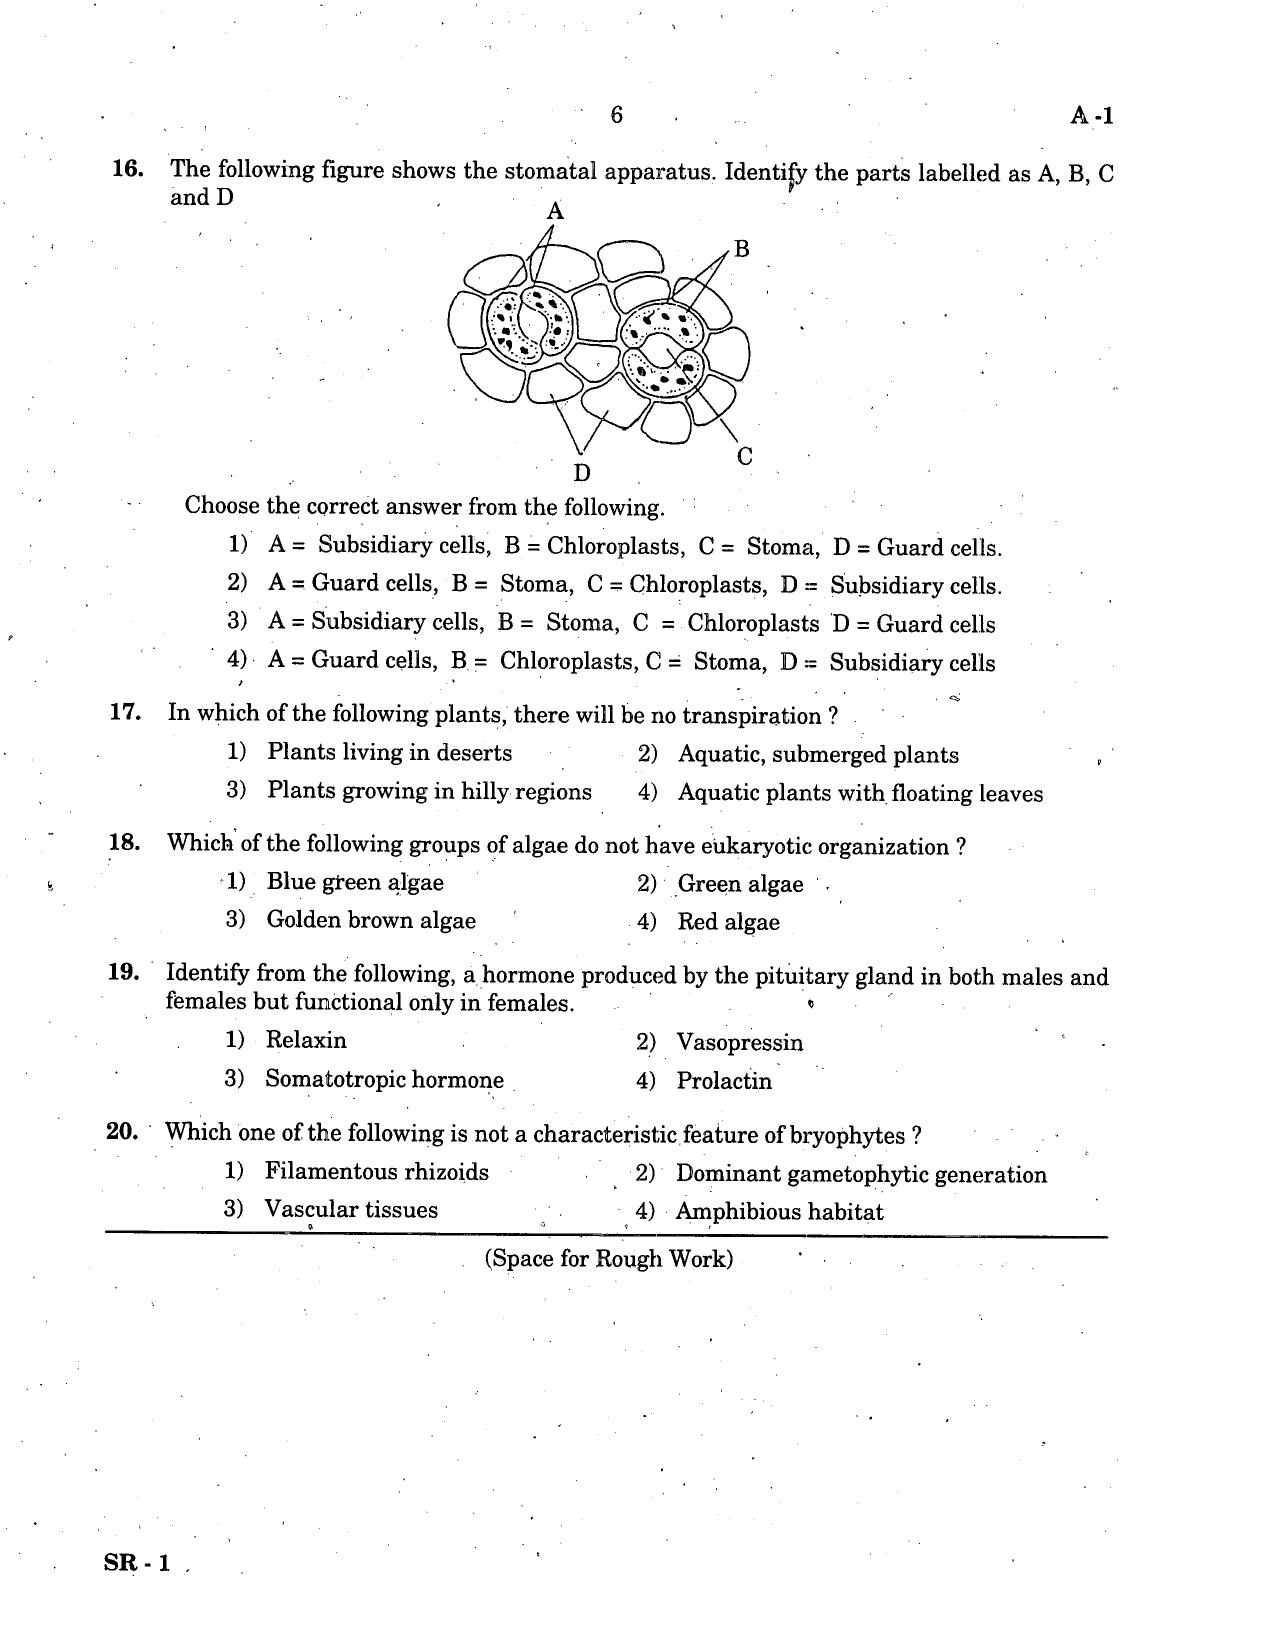 KCET Biology 2005 Question Papers - Page 6